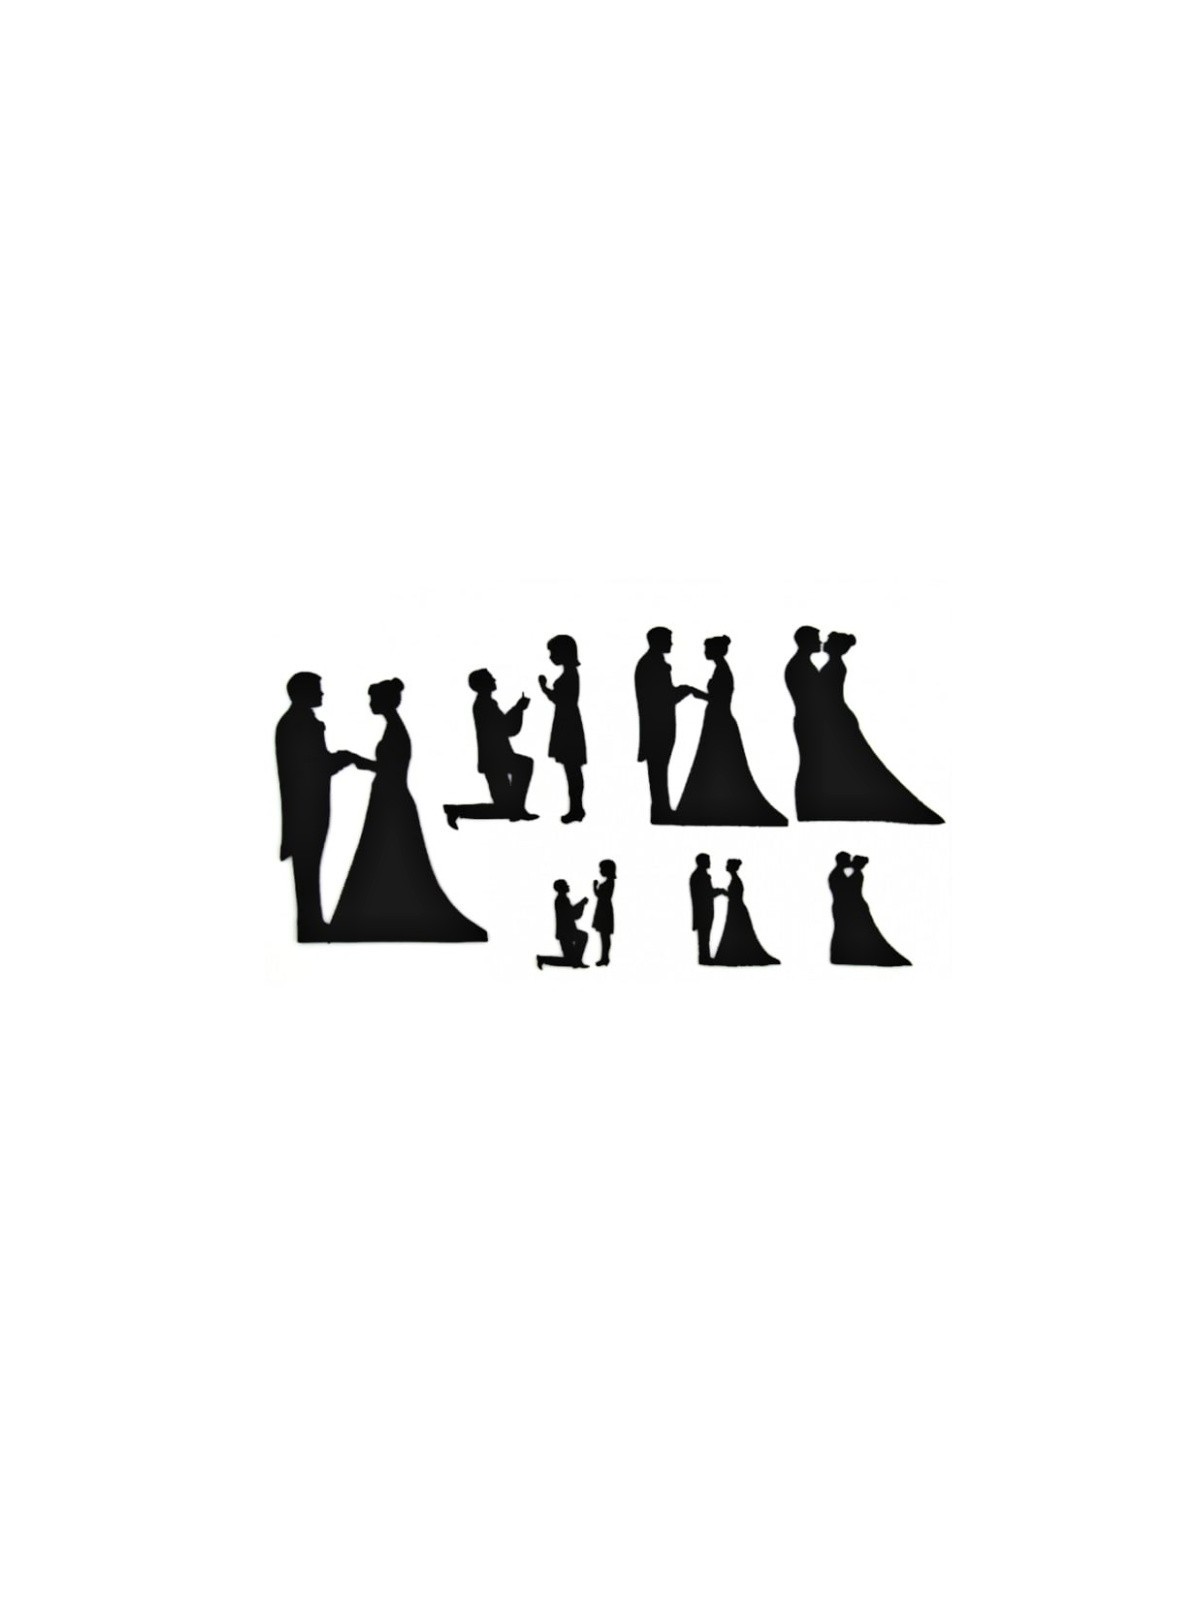 Cutters patchwork - wedding silhouettes 9pcs